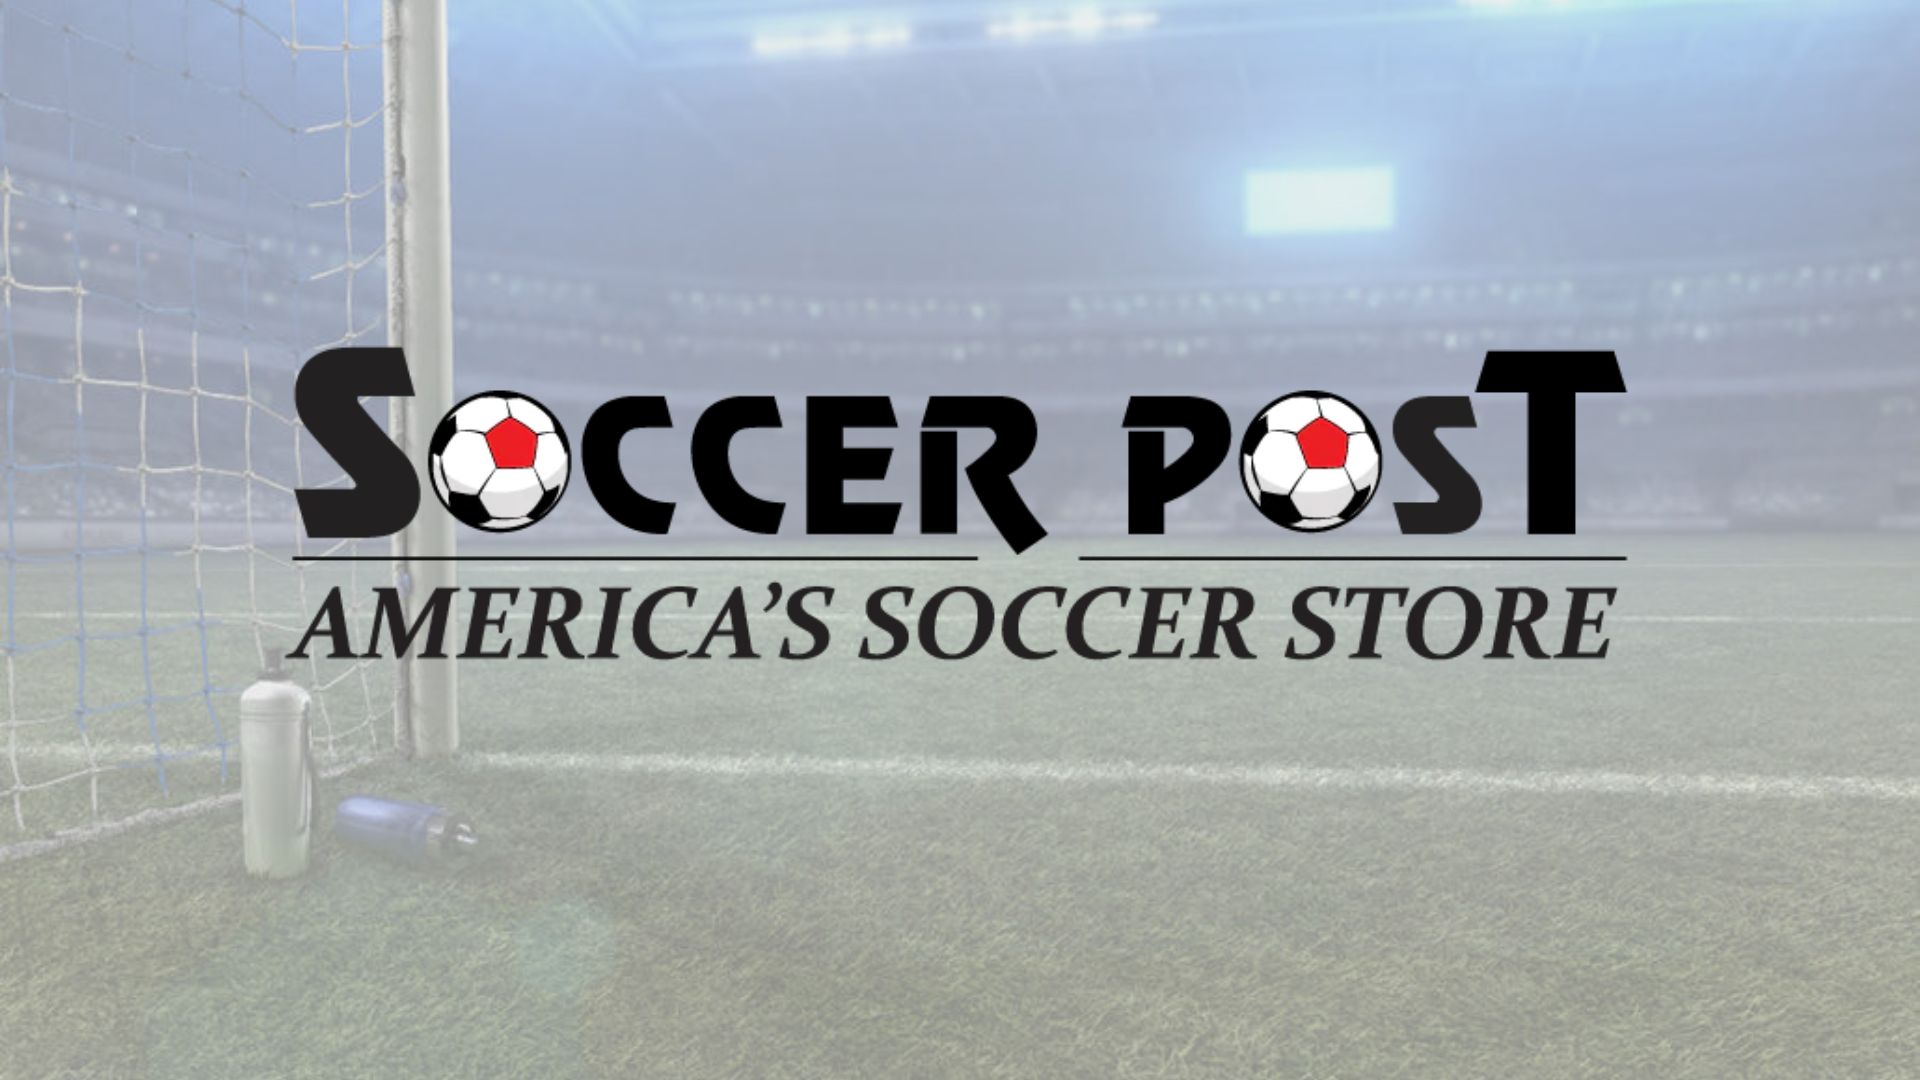 Soccer Post Expands Its Reign with Acquisition of Soccer Pro